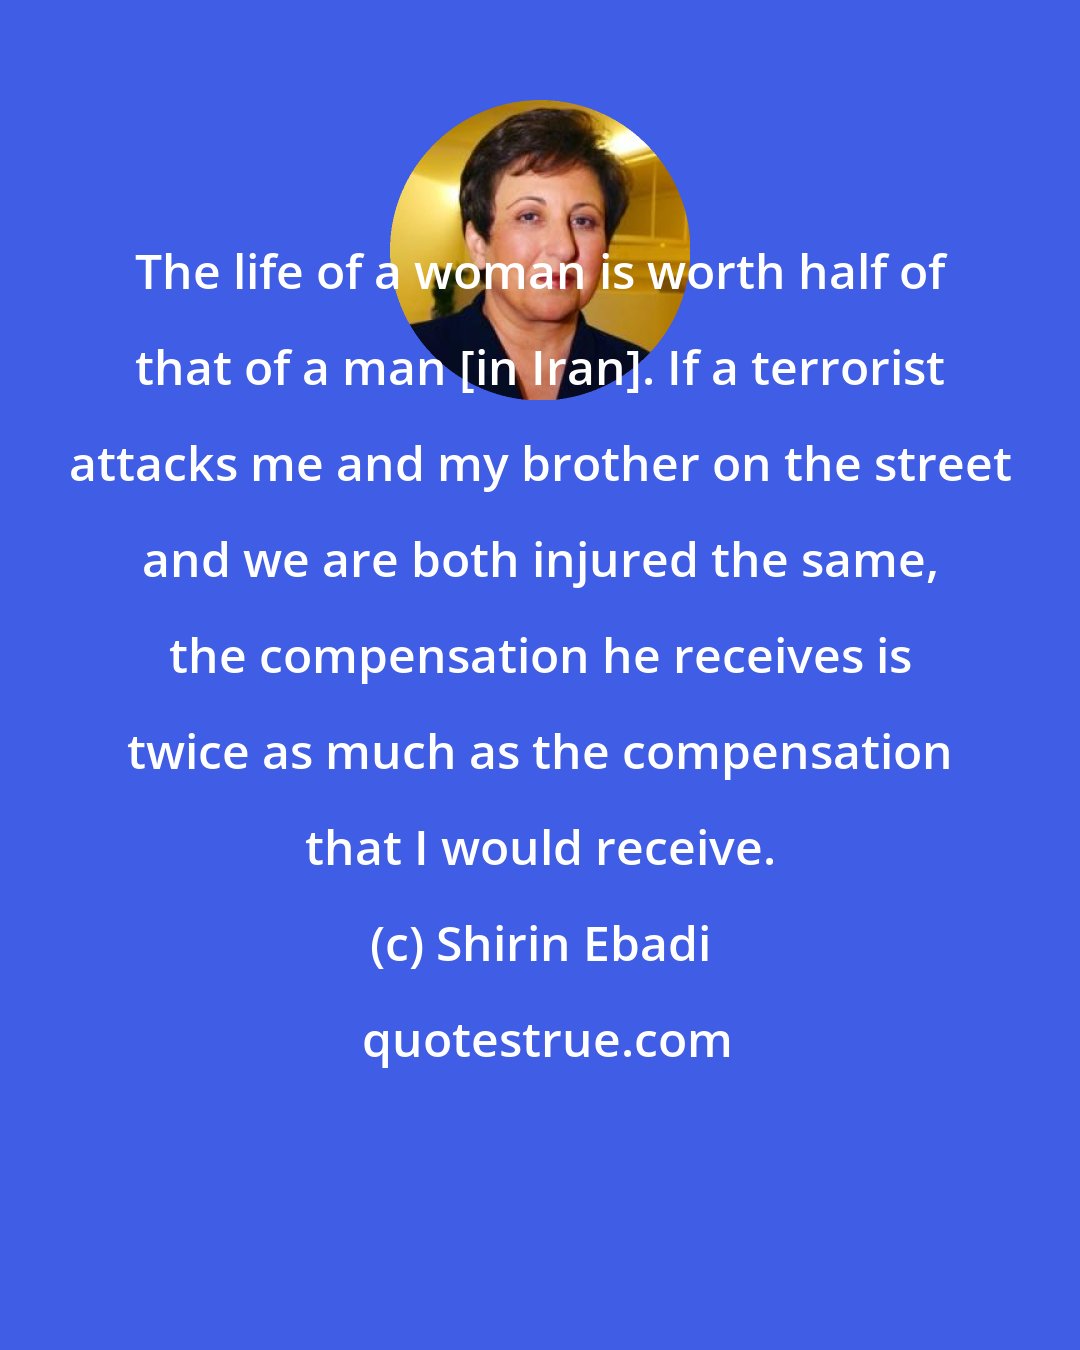 Shirin Ebadi: The life of a woman is worth half of that of a man [in Iran]. If a terrorist attacks me and my brother on the street and we are both injured the same, the compensation he receives is twice as much as the compensation that I would receive.